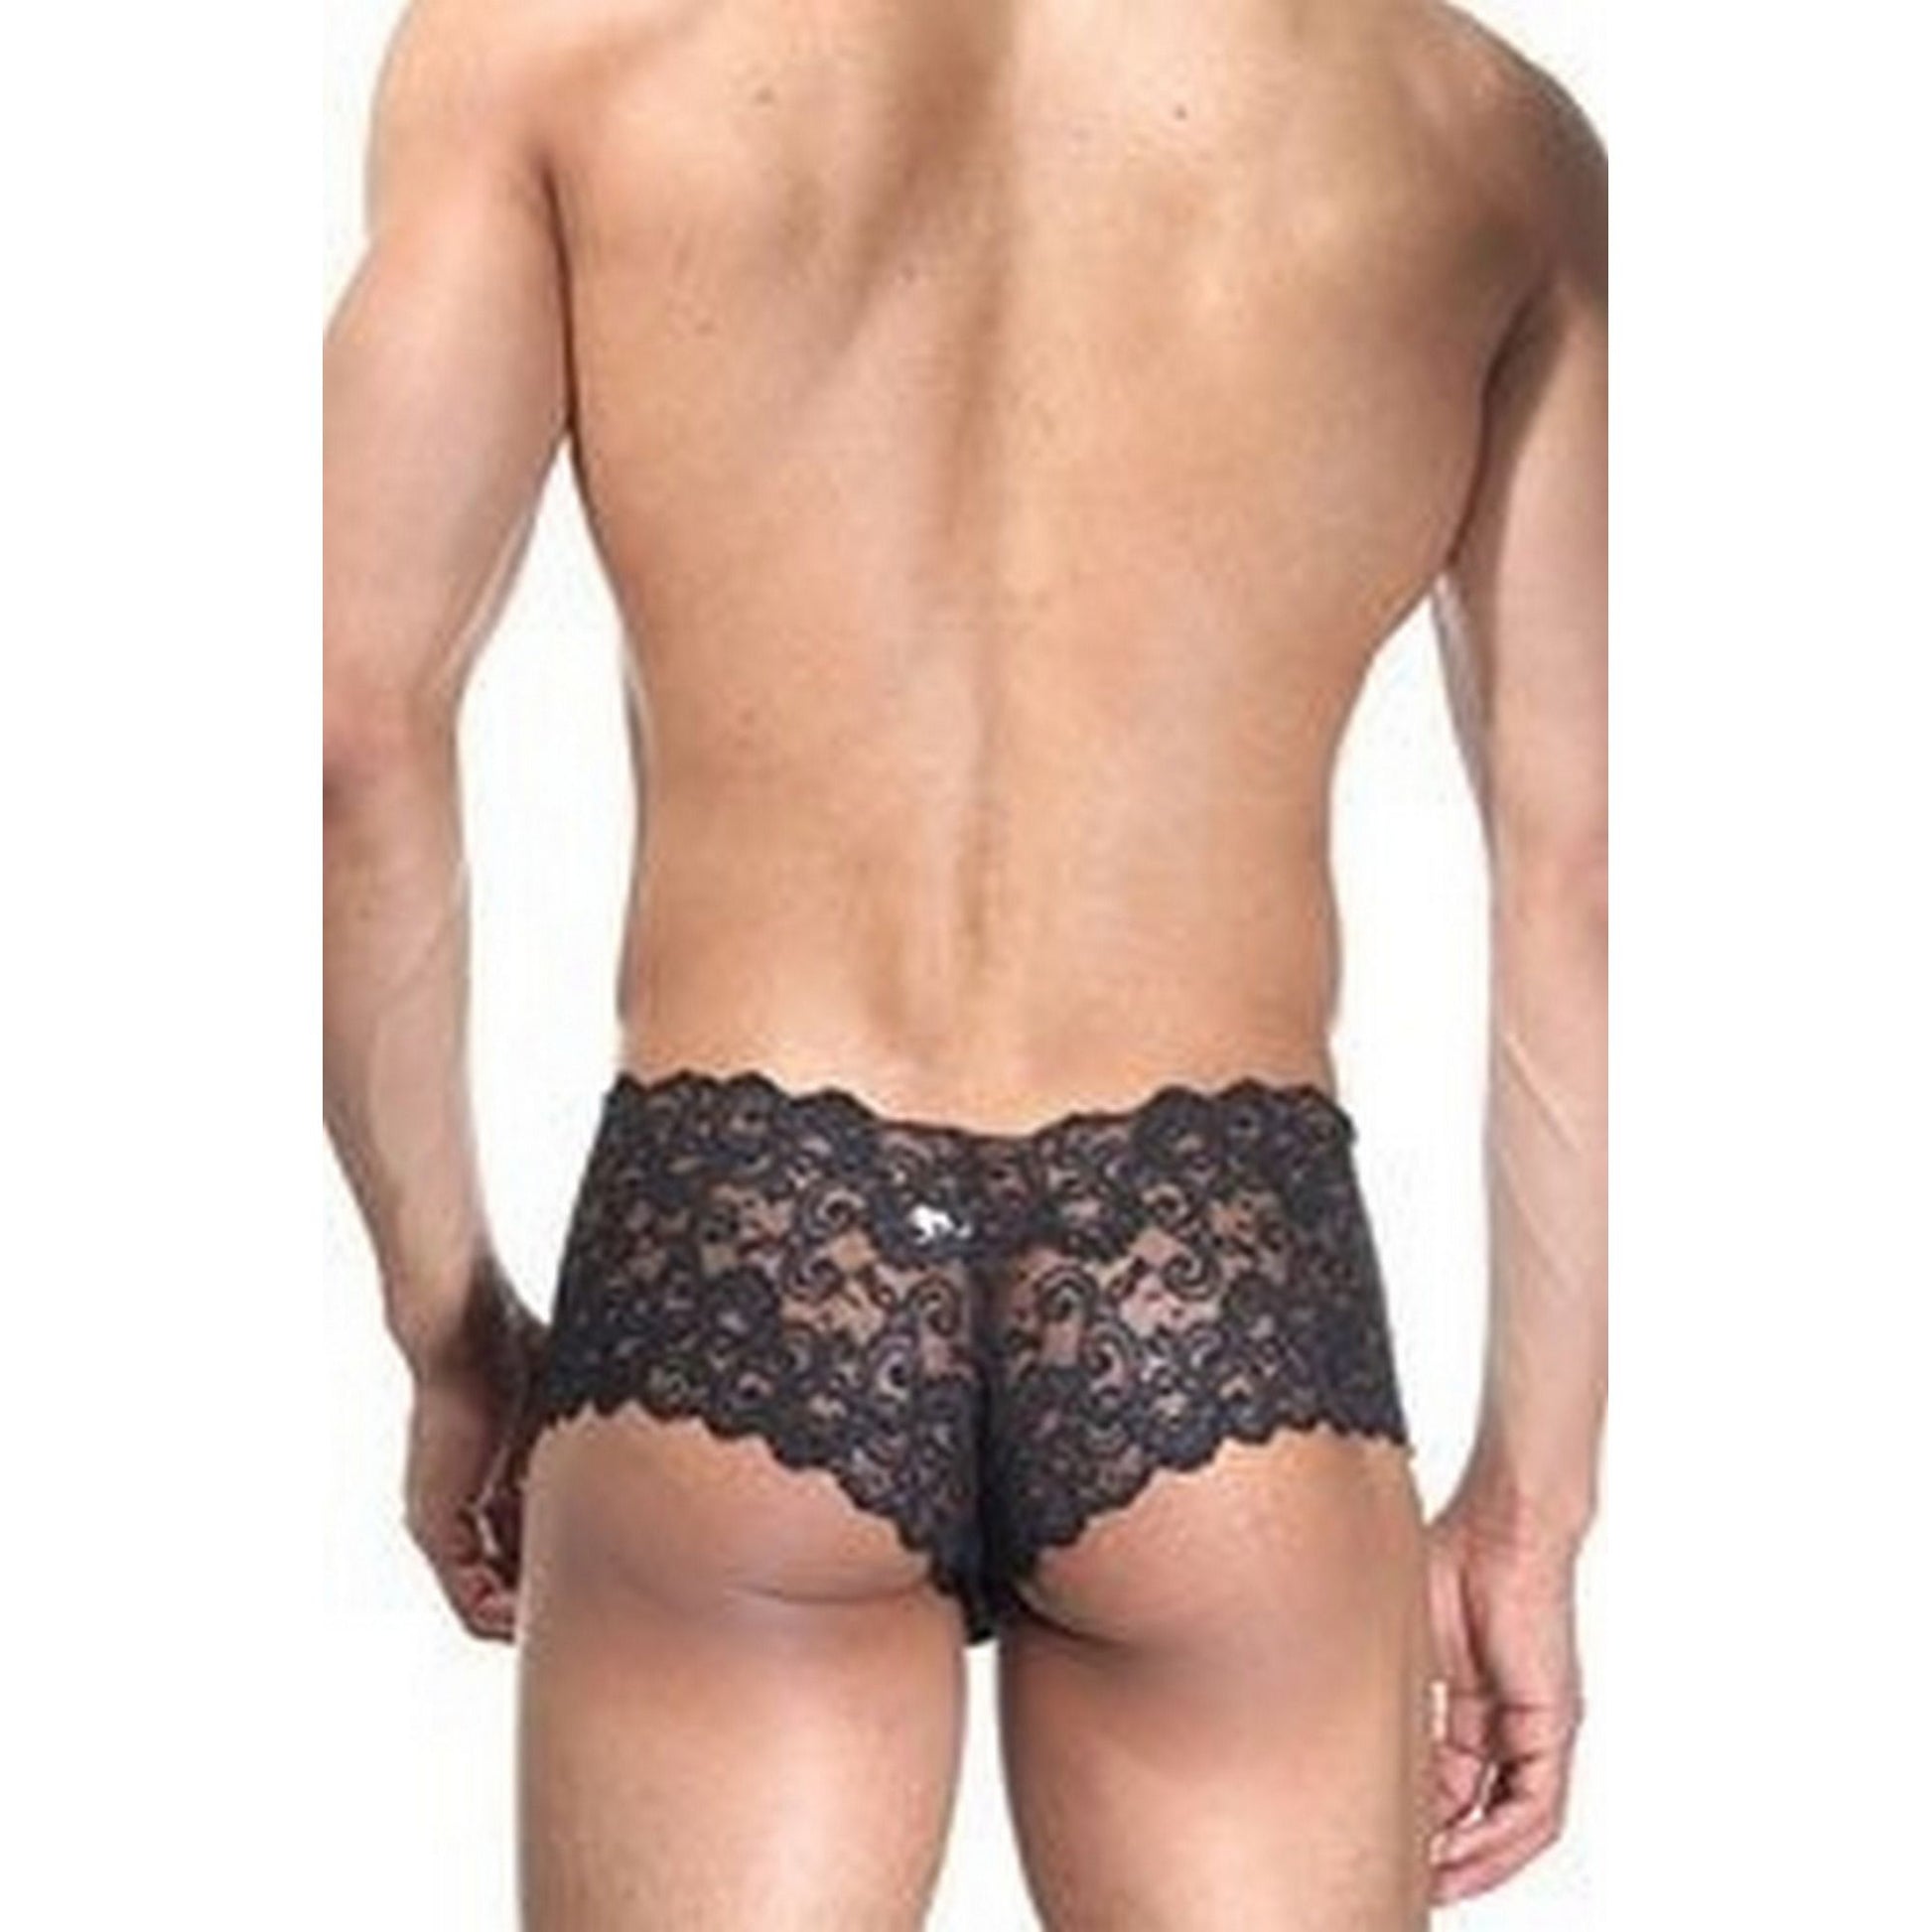 Men's Cheeky Underwear Sexy Lace See Through Thong Underpanties